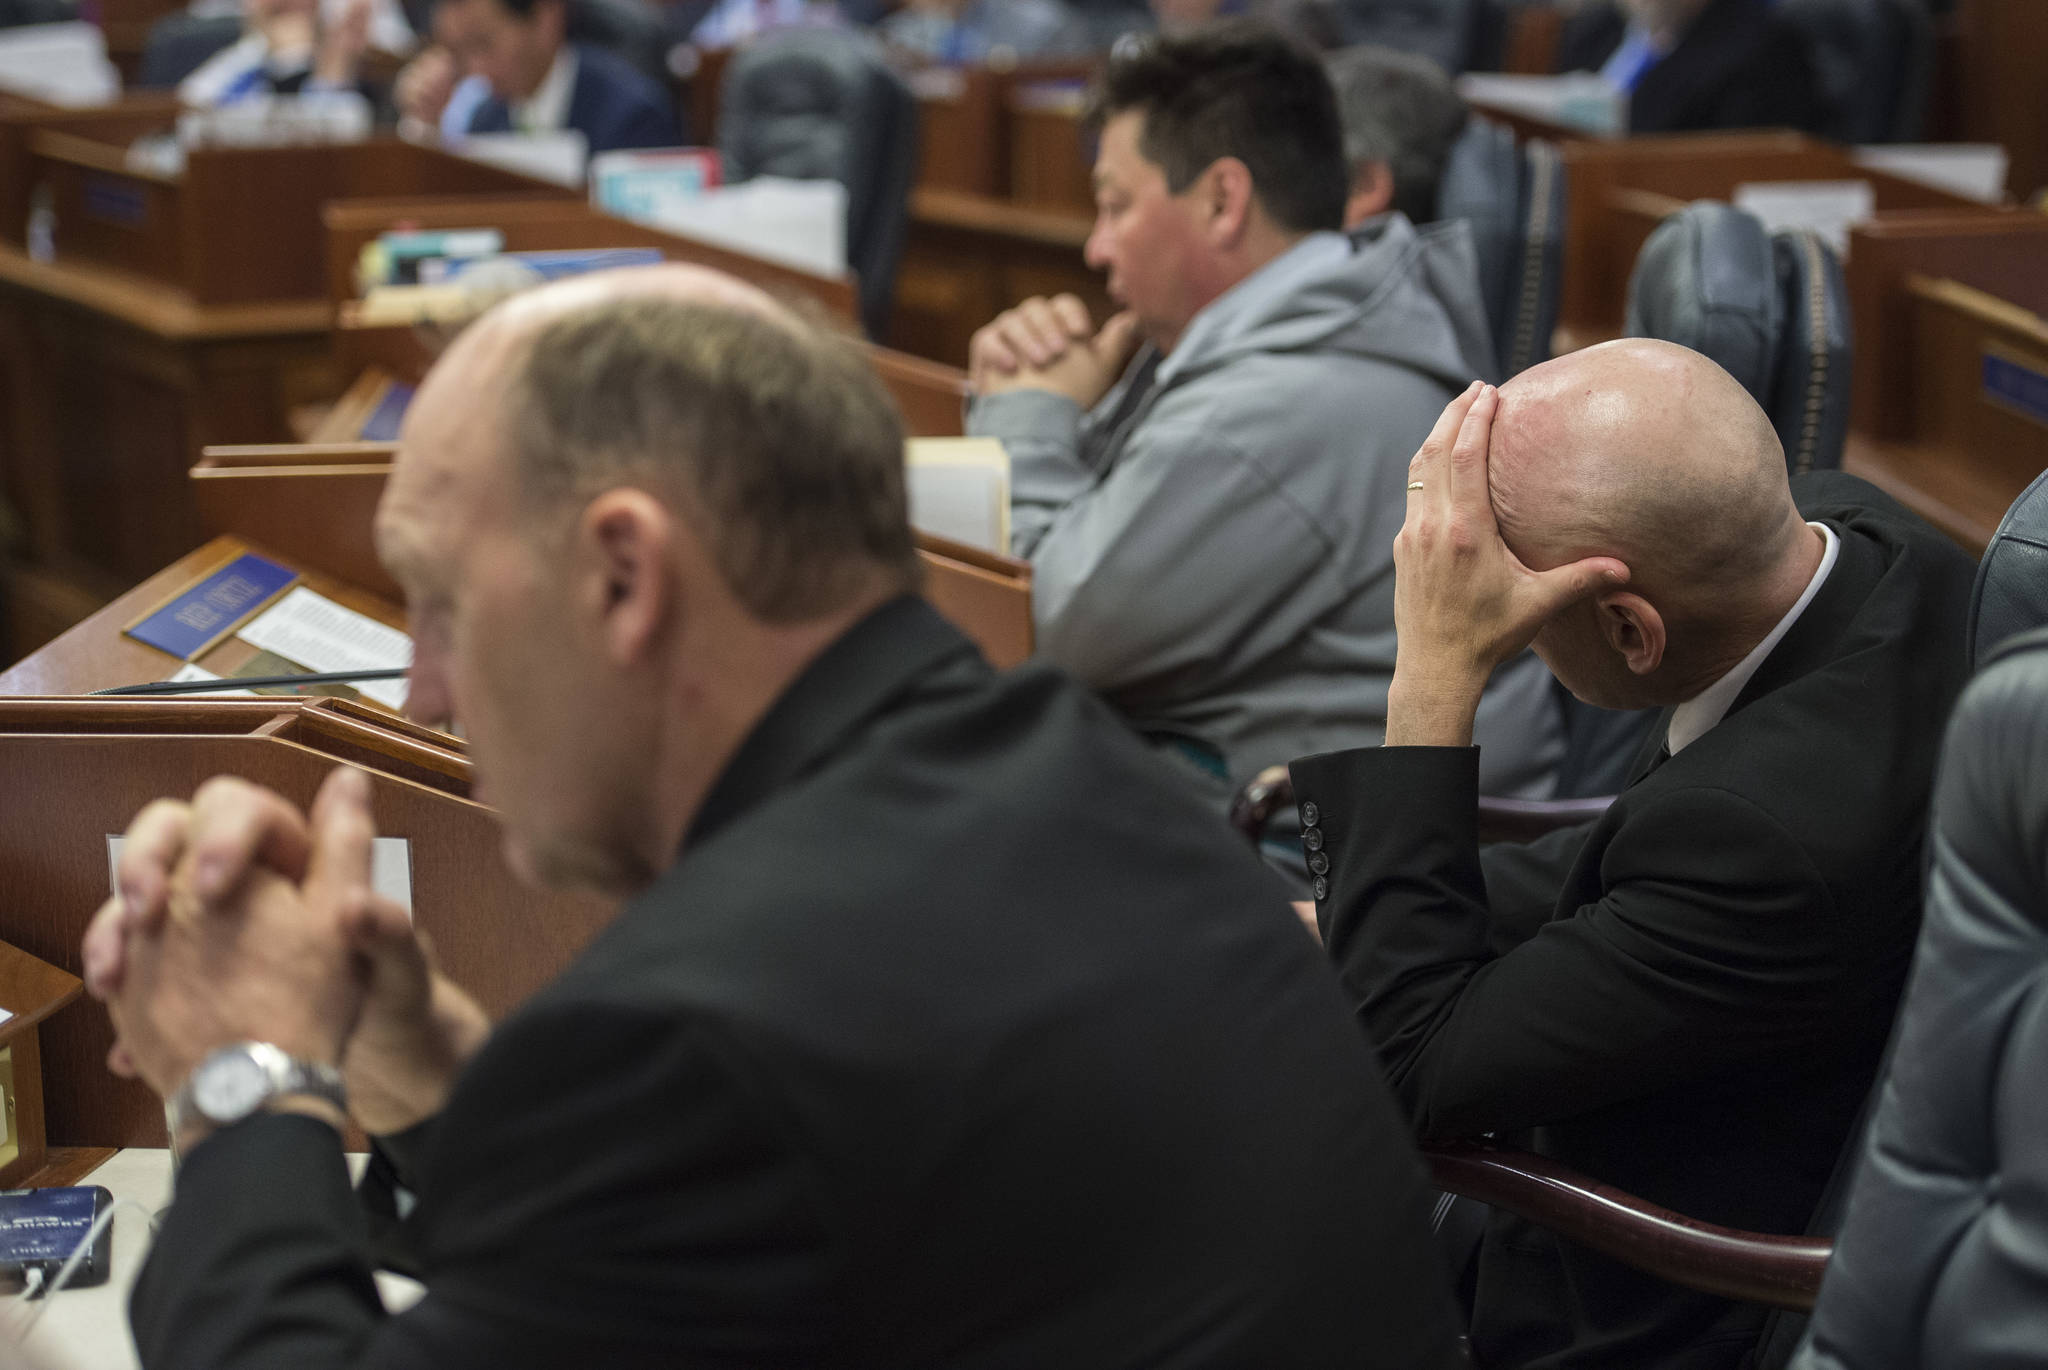 Rep. Gary Knopp, R-Kenai, left, Rep. Daniel Ortiz, I-Ketchikan, right, and Rep. Dean Westlake, D-Kotzebue, listen to debate on the state budget Thursday, June 23, 2017. Both the House and Senate voted to approve a budget and keep the State of Alaska from shutting down on July 1. (Michael Penn | Juneau Empire)